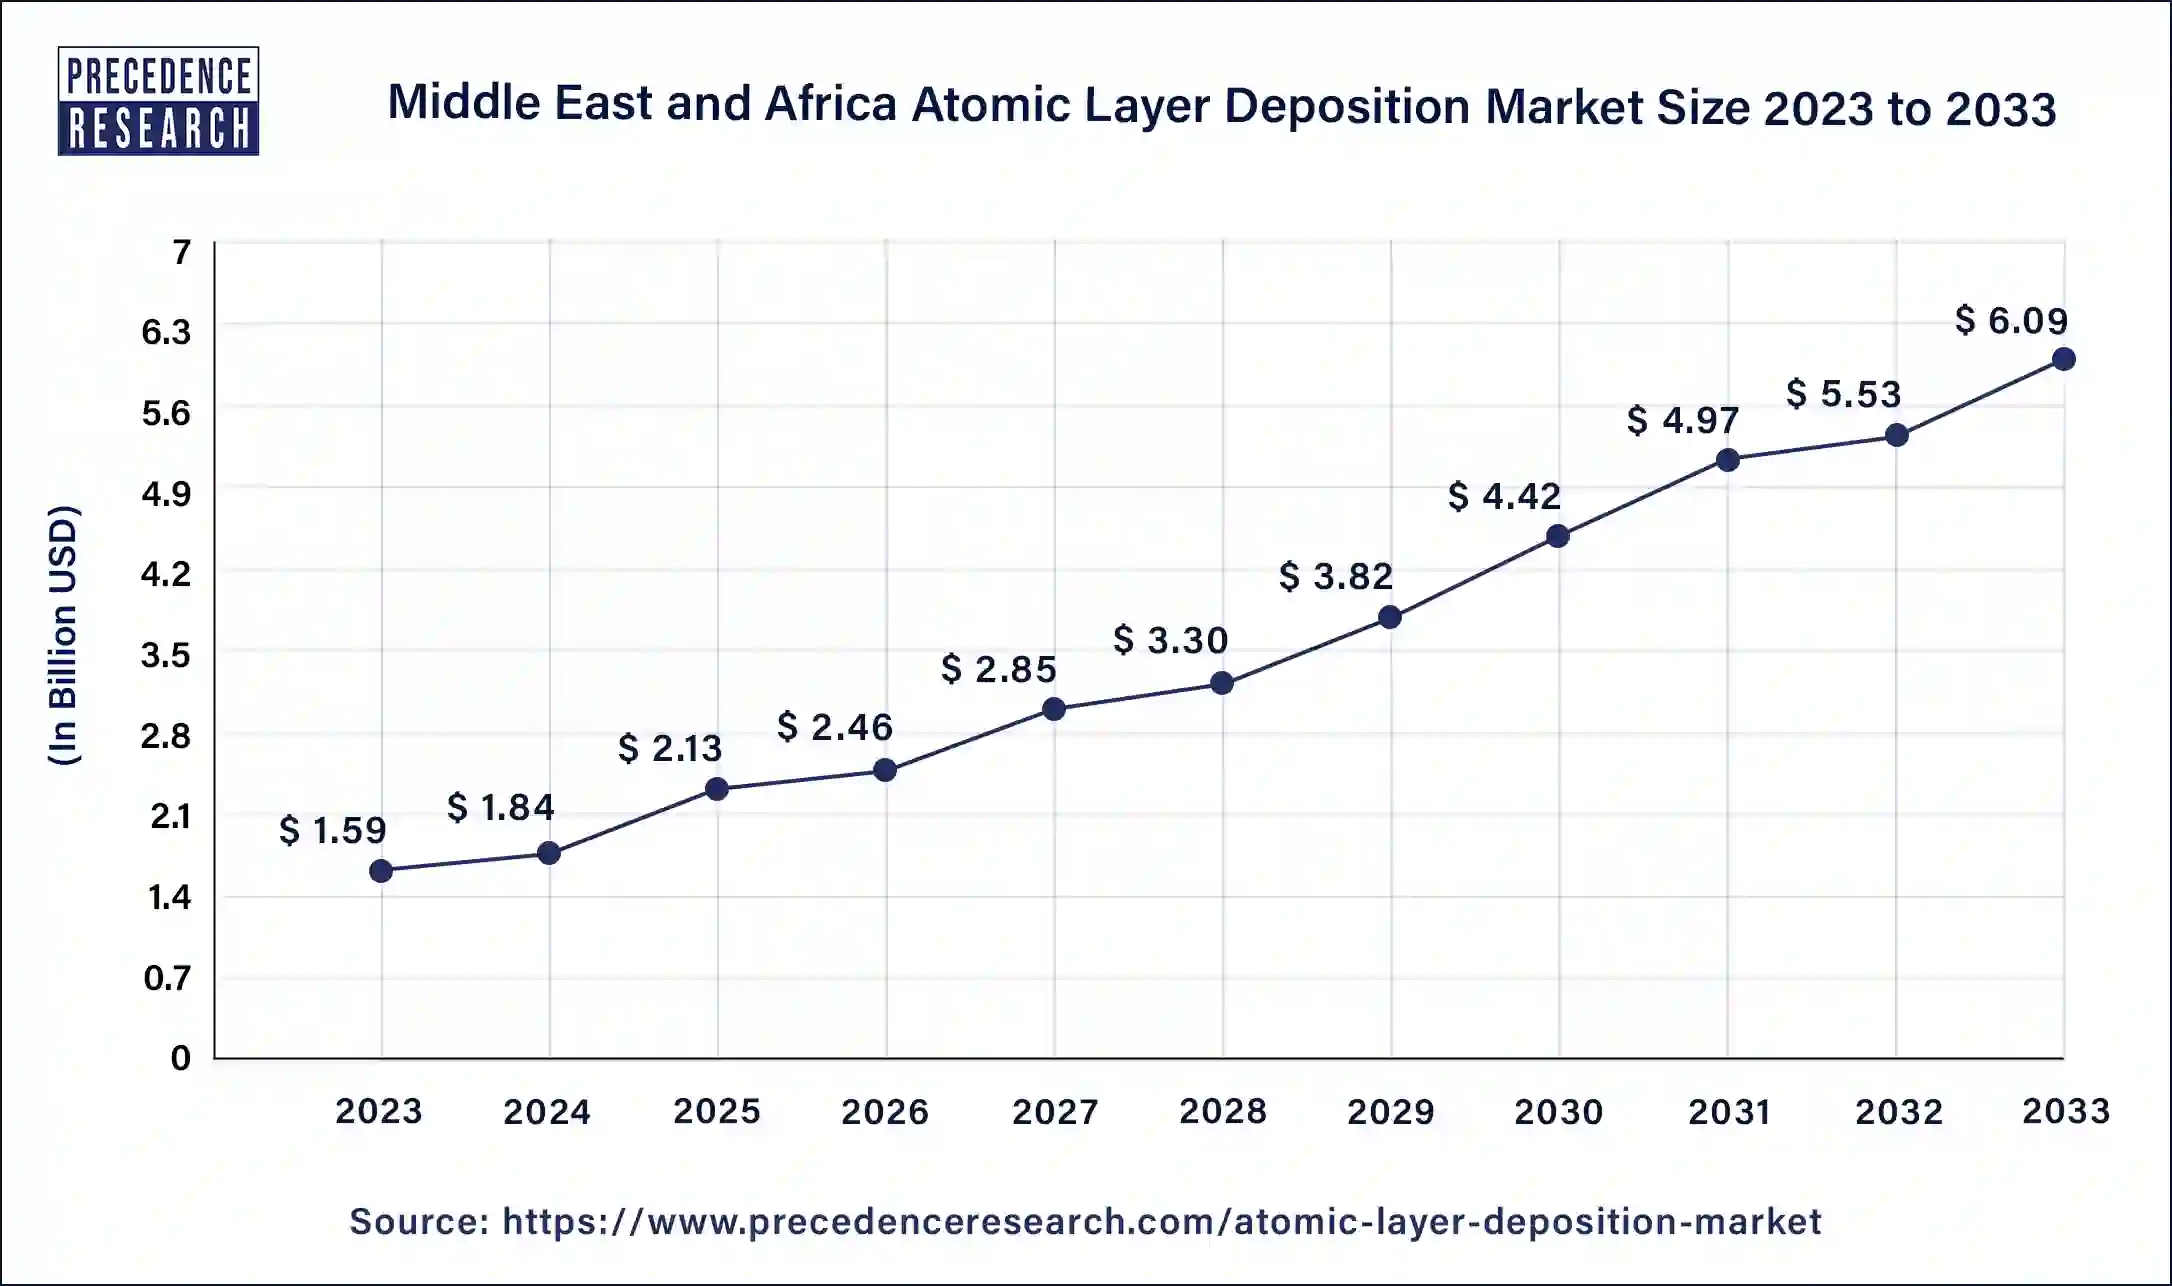 Middle East and Africa Atomic Layer Deposition Market Size 2024 To 2033